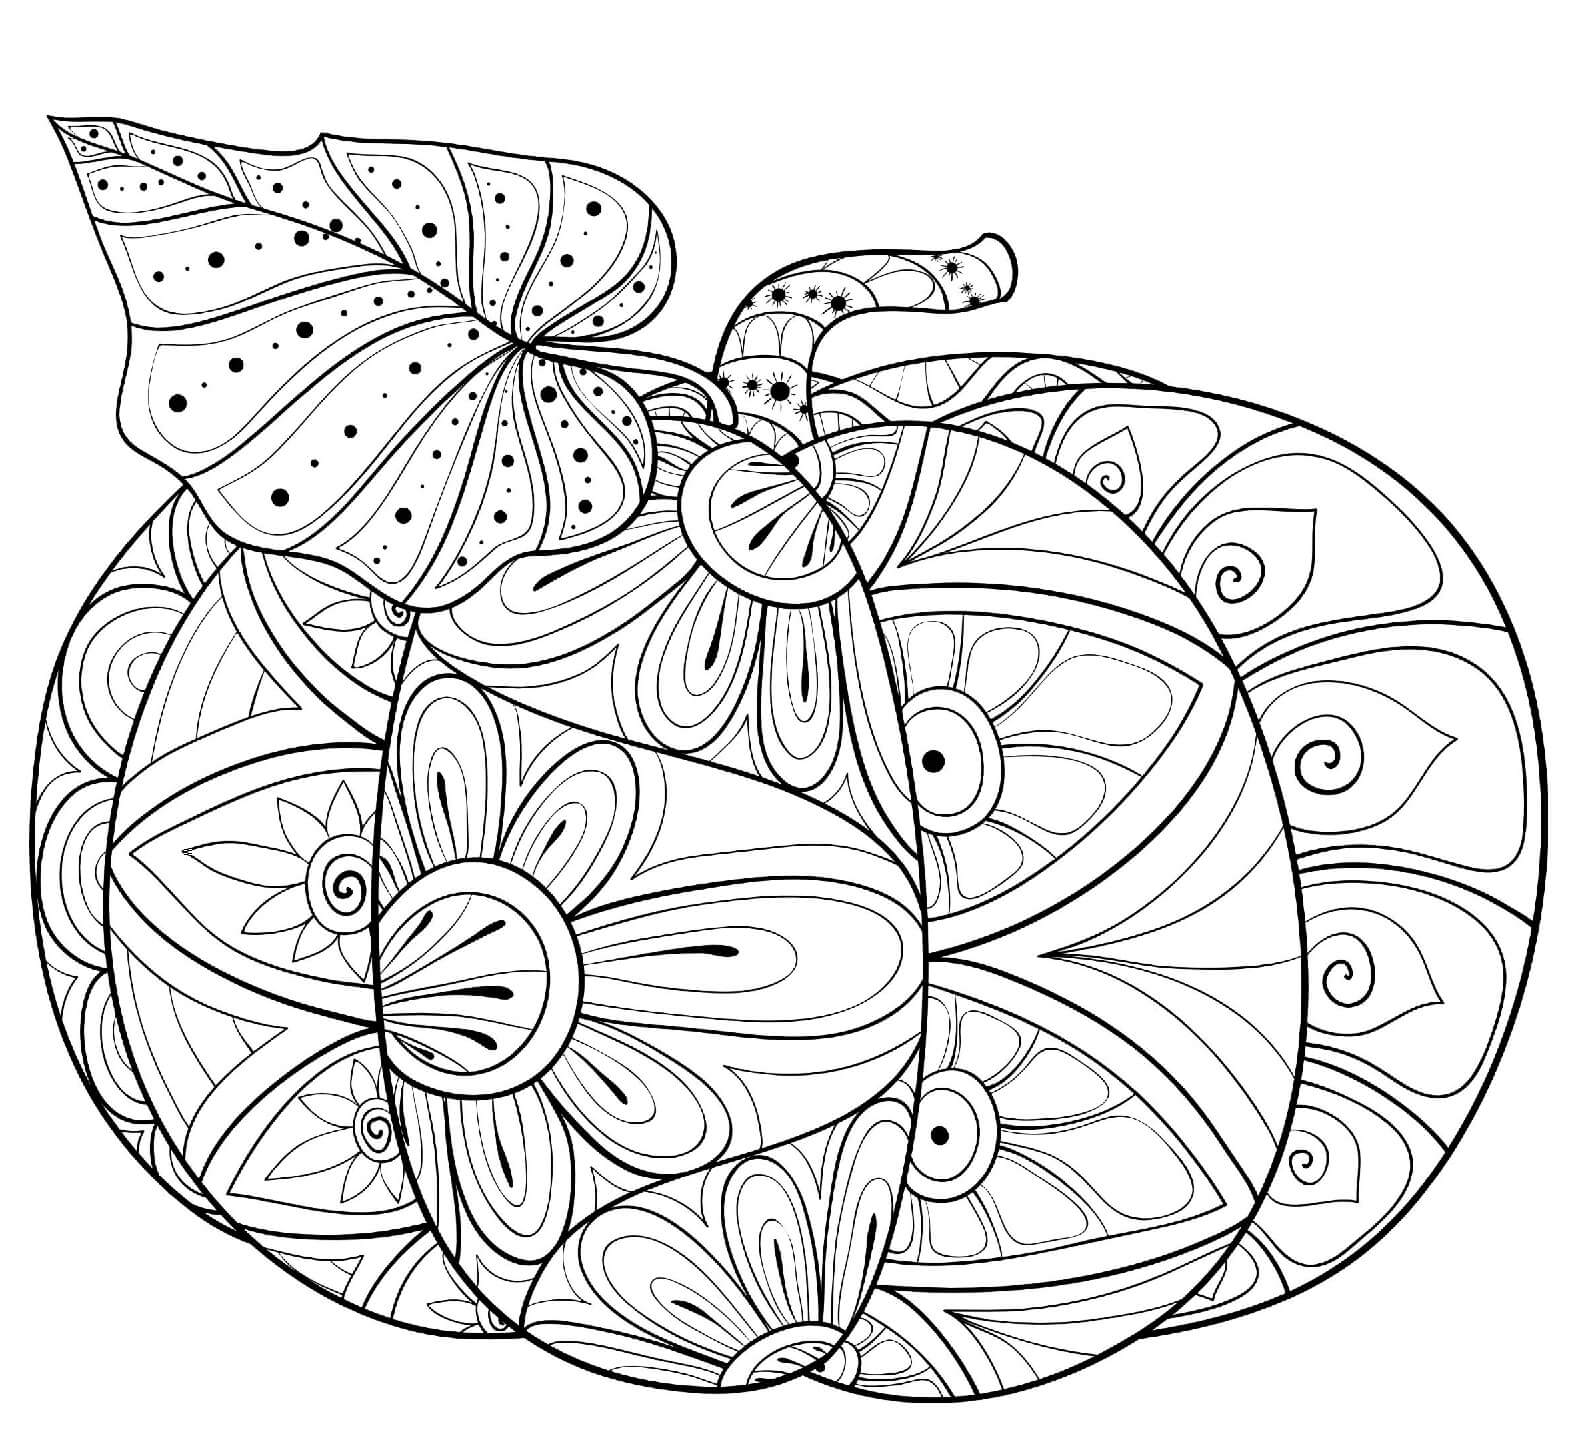 Halloween Intricate Pumpkin And Leaf Coloring Page